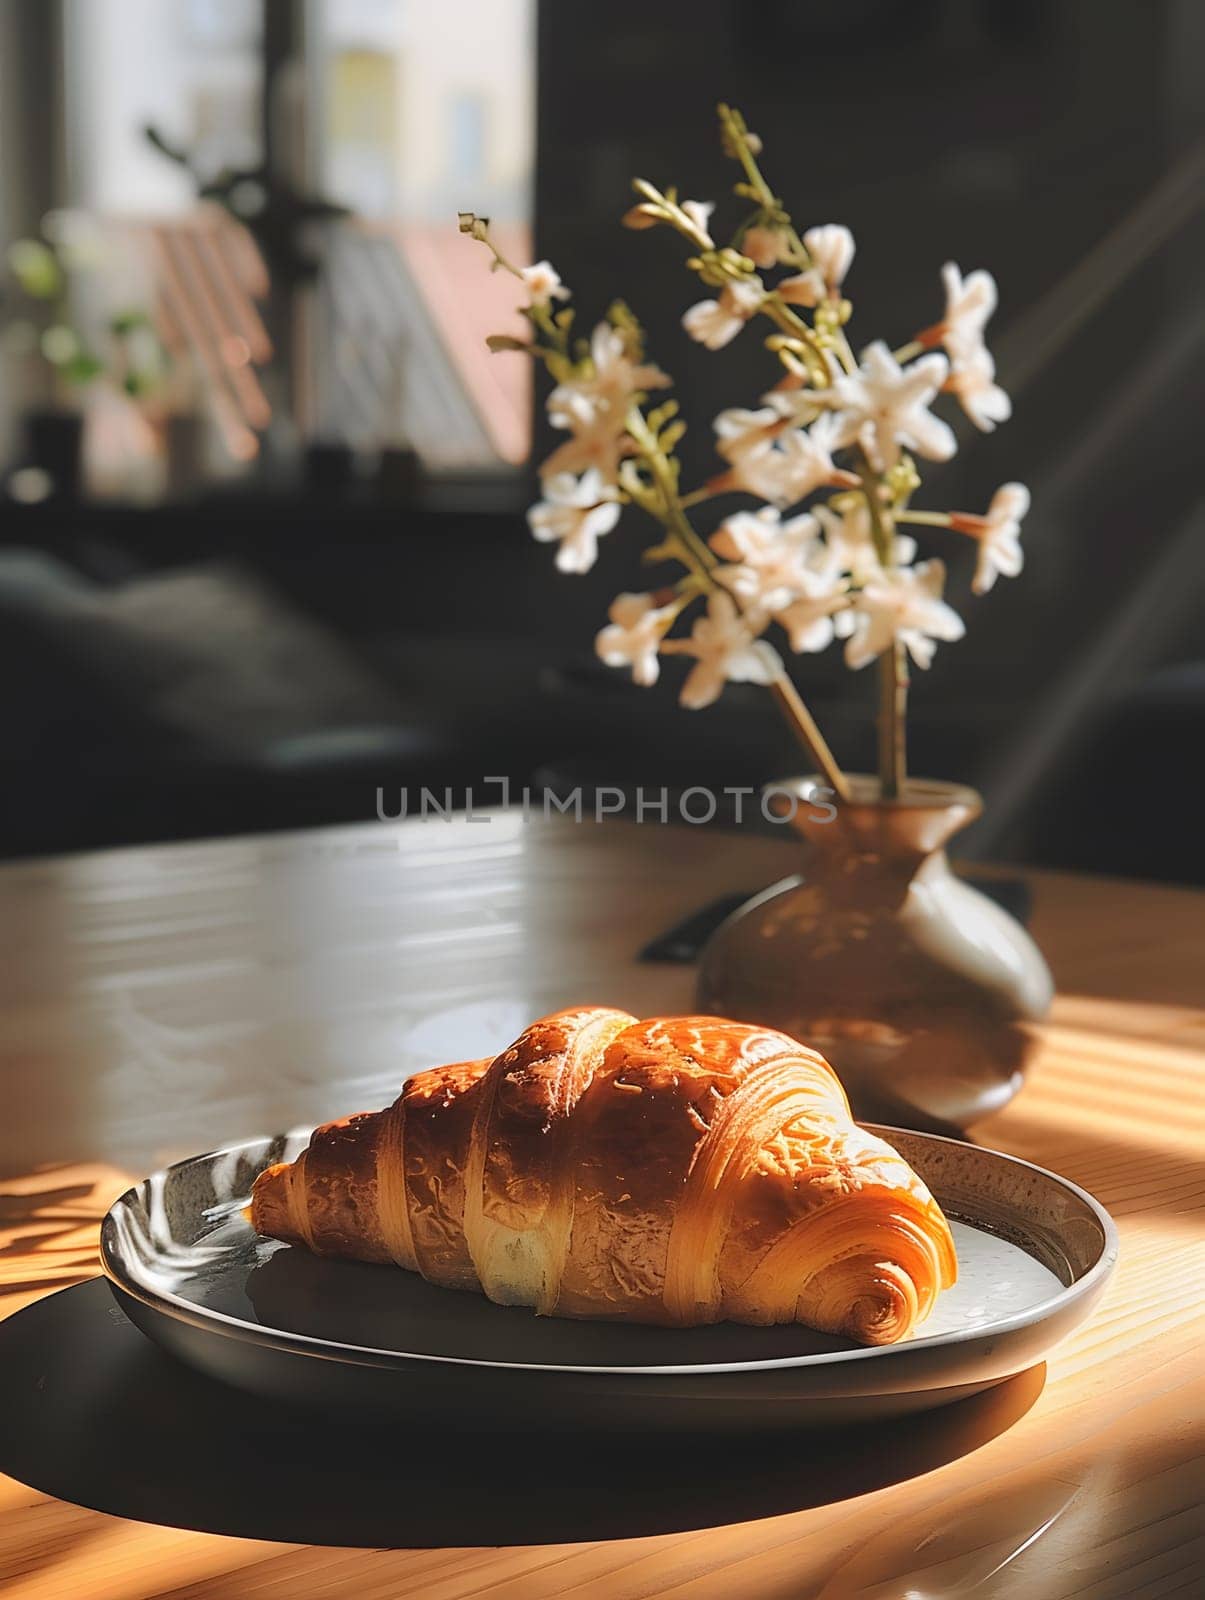 A croissant sits on a plate on a table beside a vase of flowers, creating a picturesque scene. The food, plant, tableware, and flowers blend beautifully together